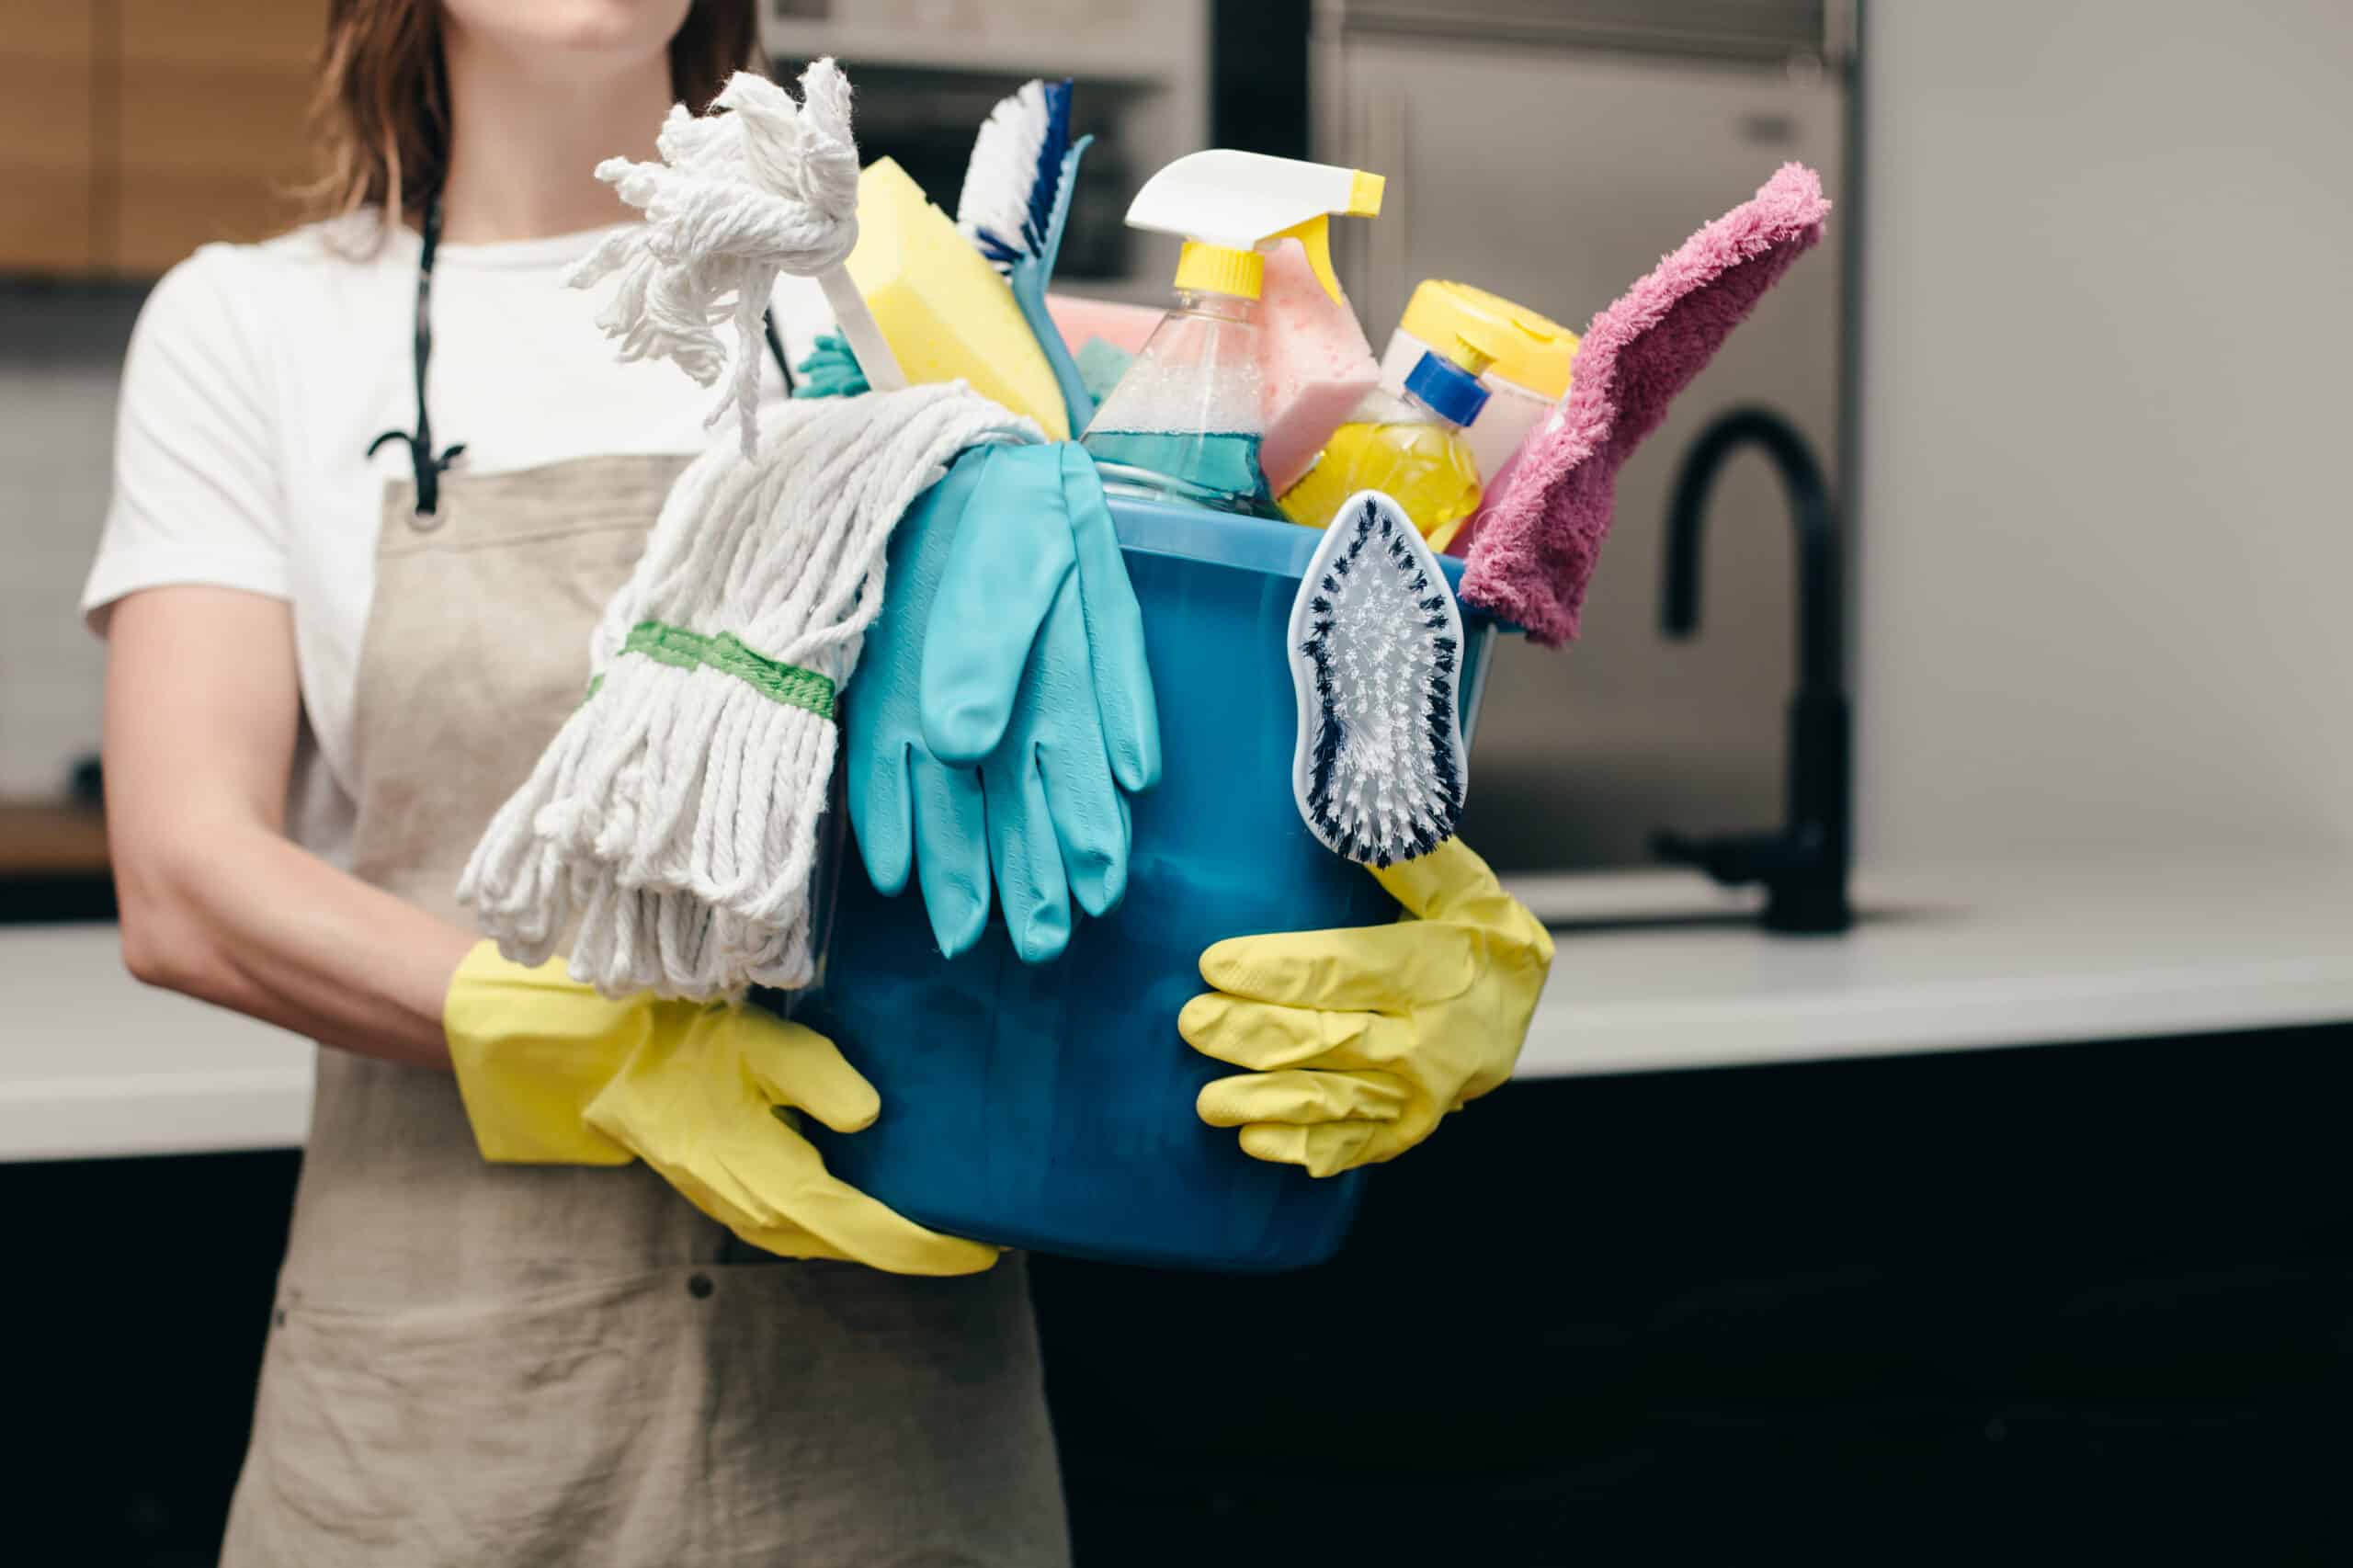 Woman holding bucket of cleaning supplies.